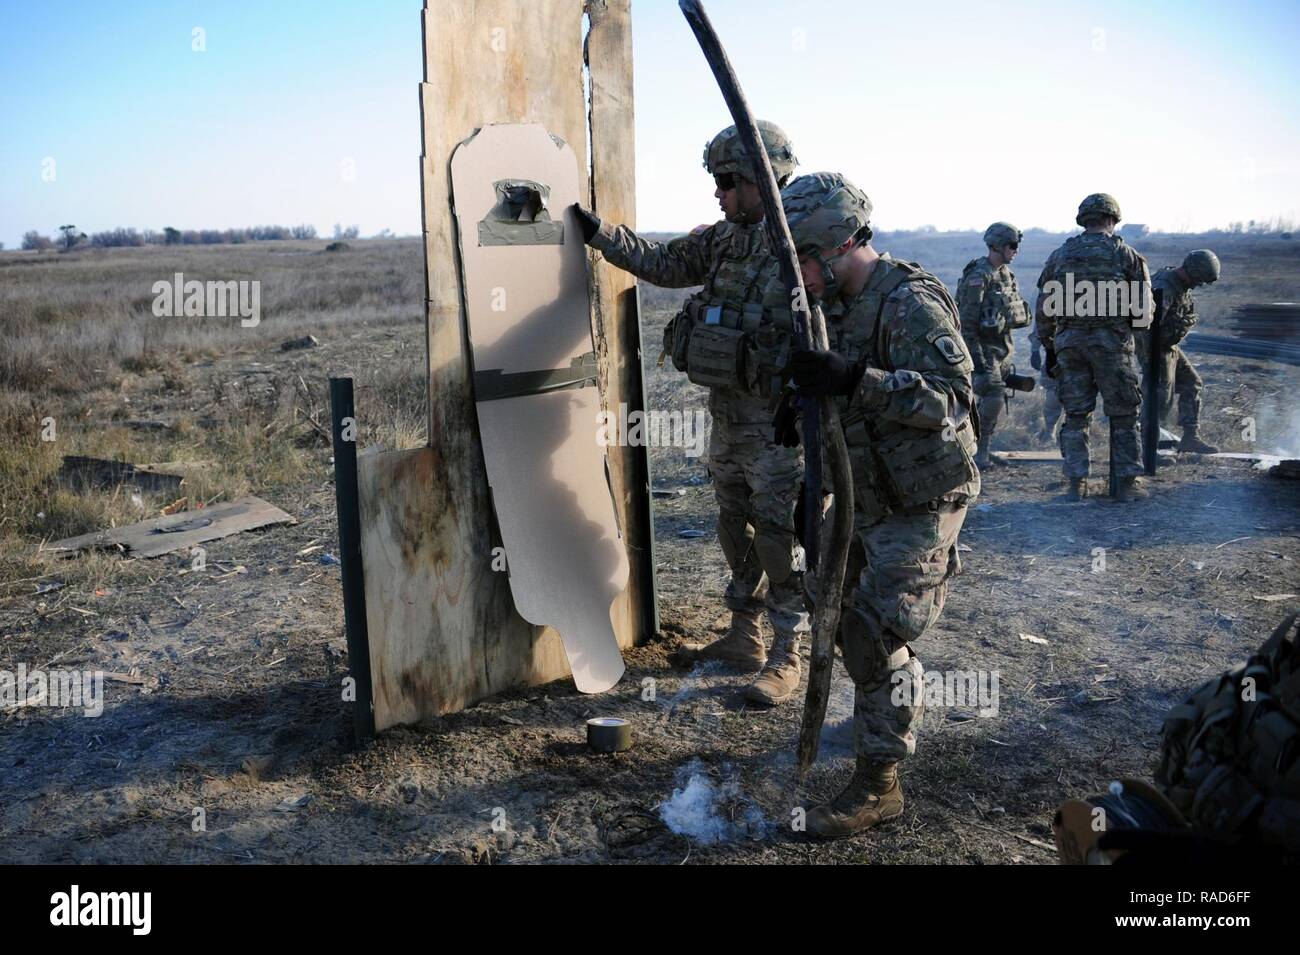 U.S. Army paratroopers from 54th Brigade Engineer Battalion, 173rd Airborne Brigade, inspect targets after detonation at the Urban Breaching Range at Foce Reno Italian training area, Ravenna, Italy, Jan 24, 2017. ( Stock Photo